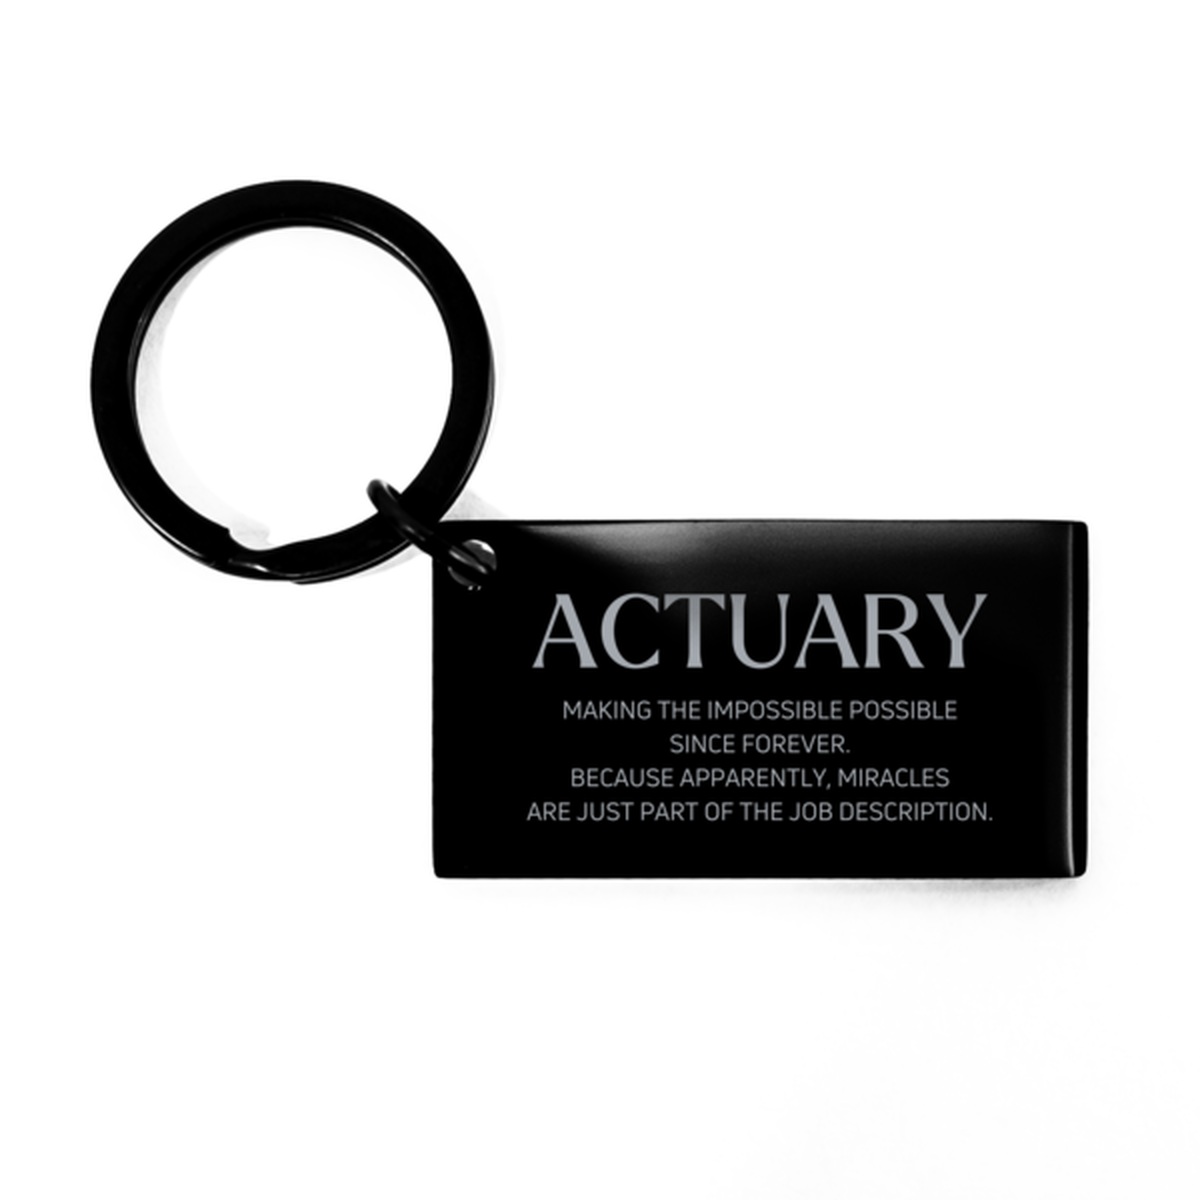 Funny Actuary Gifts, Miracles are just part of the job description, Inspirational Birthday Keychain For Actuary, Men, Women, Coworkers, Friends, Boss